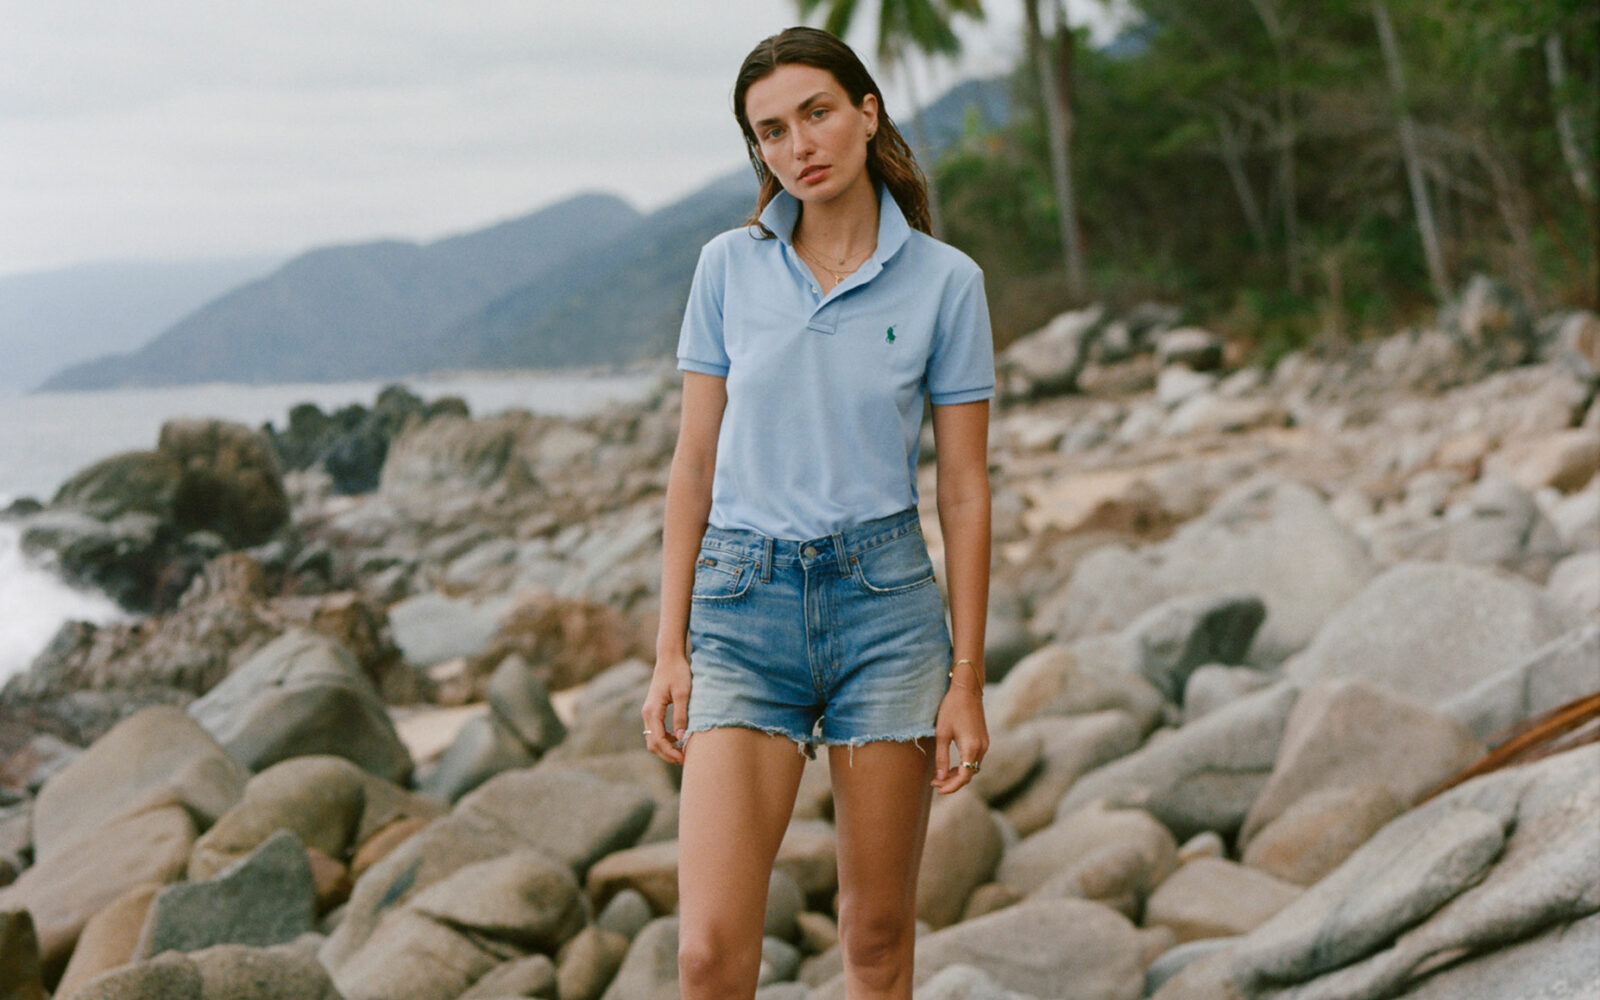 Ralph Lauren's Iconic Polo Shirt Is Getting A Mother Nature Makeover